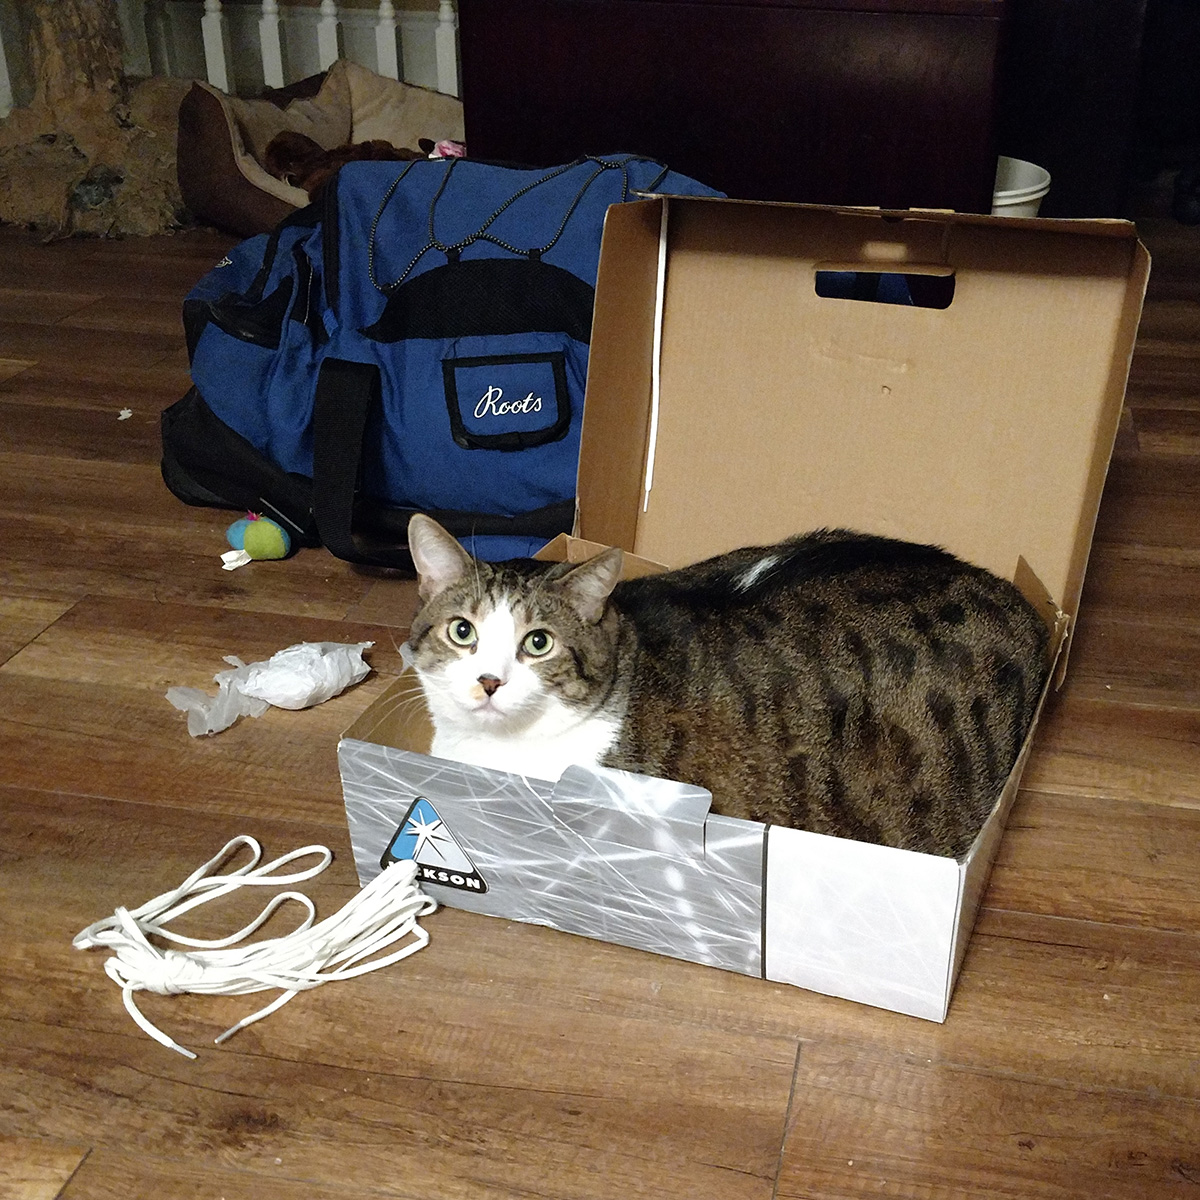 A white and tabby cat in a Jackson Skates box.